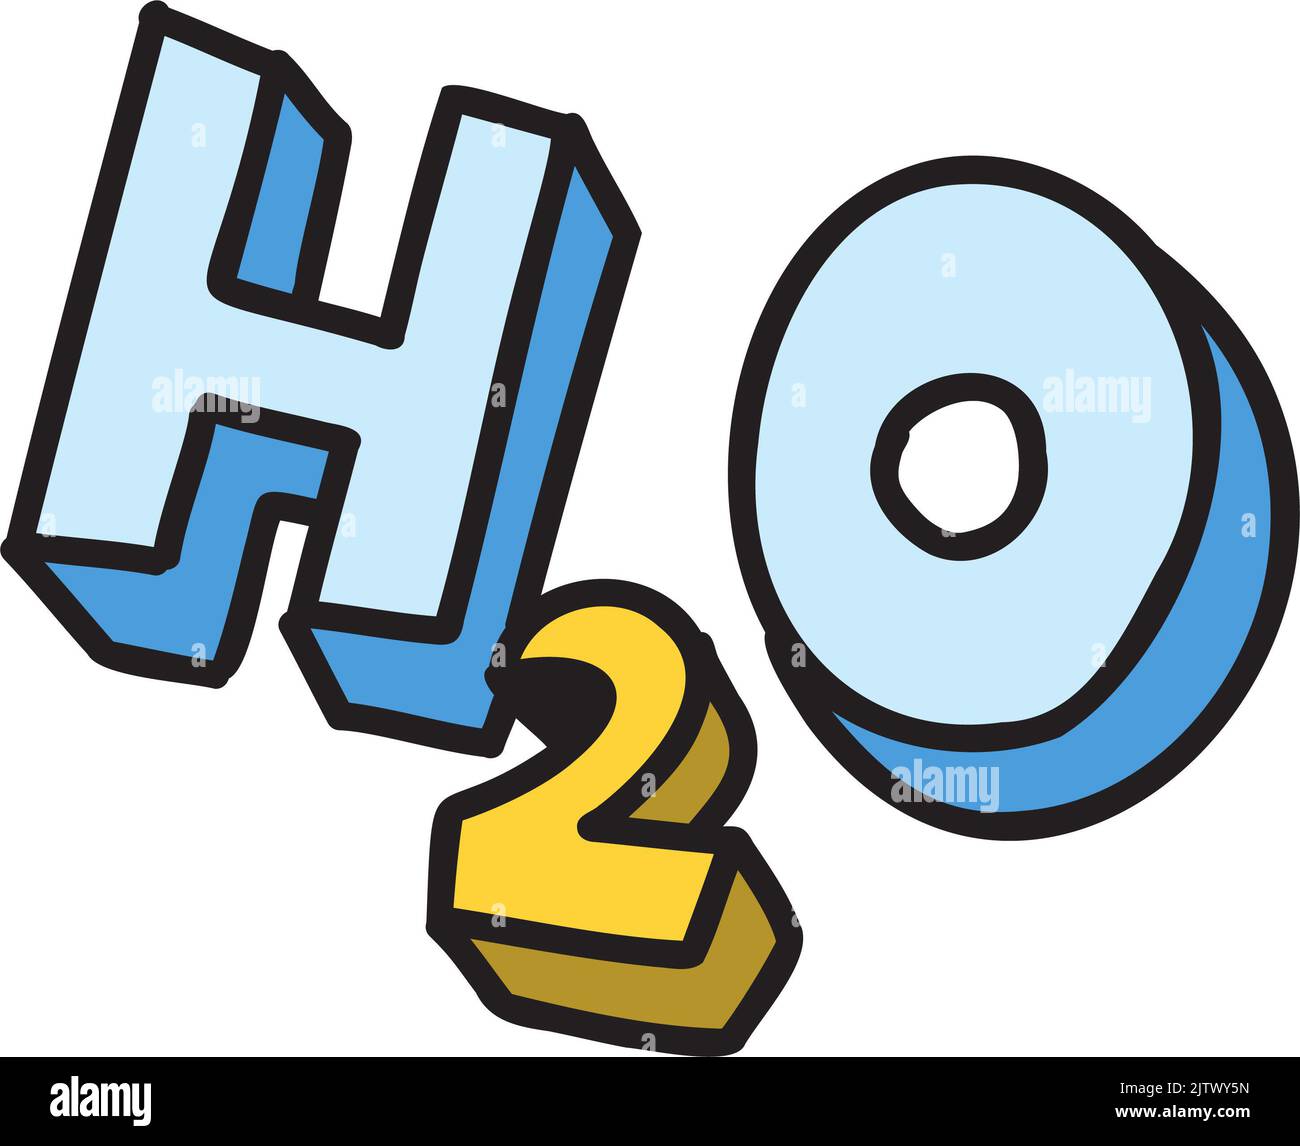 Hand Drawn H2O water letters illustration on transparent background Stock Photo